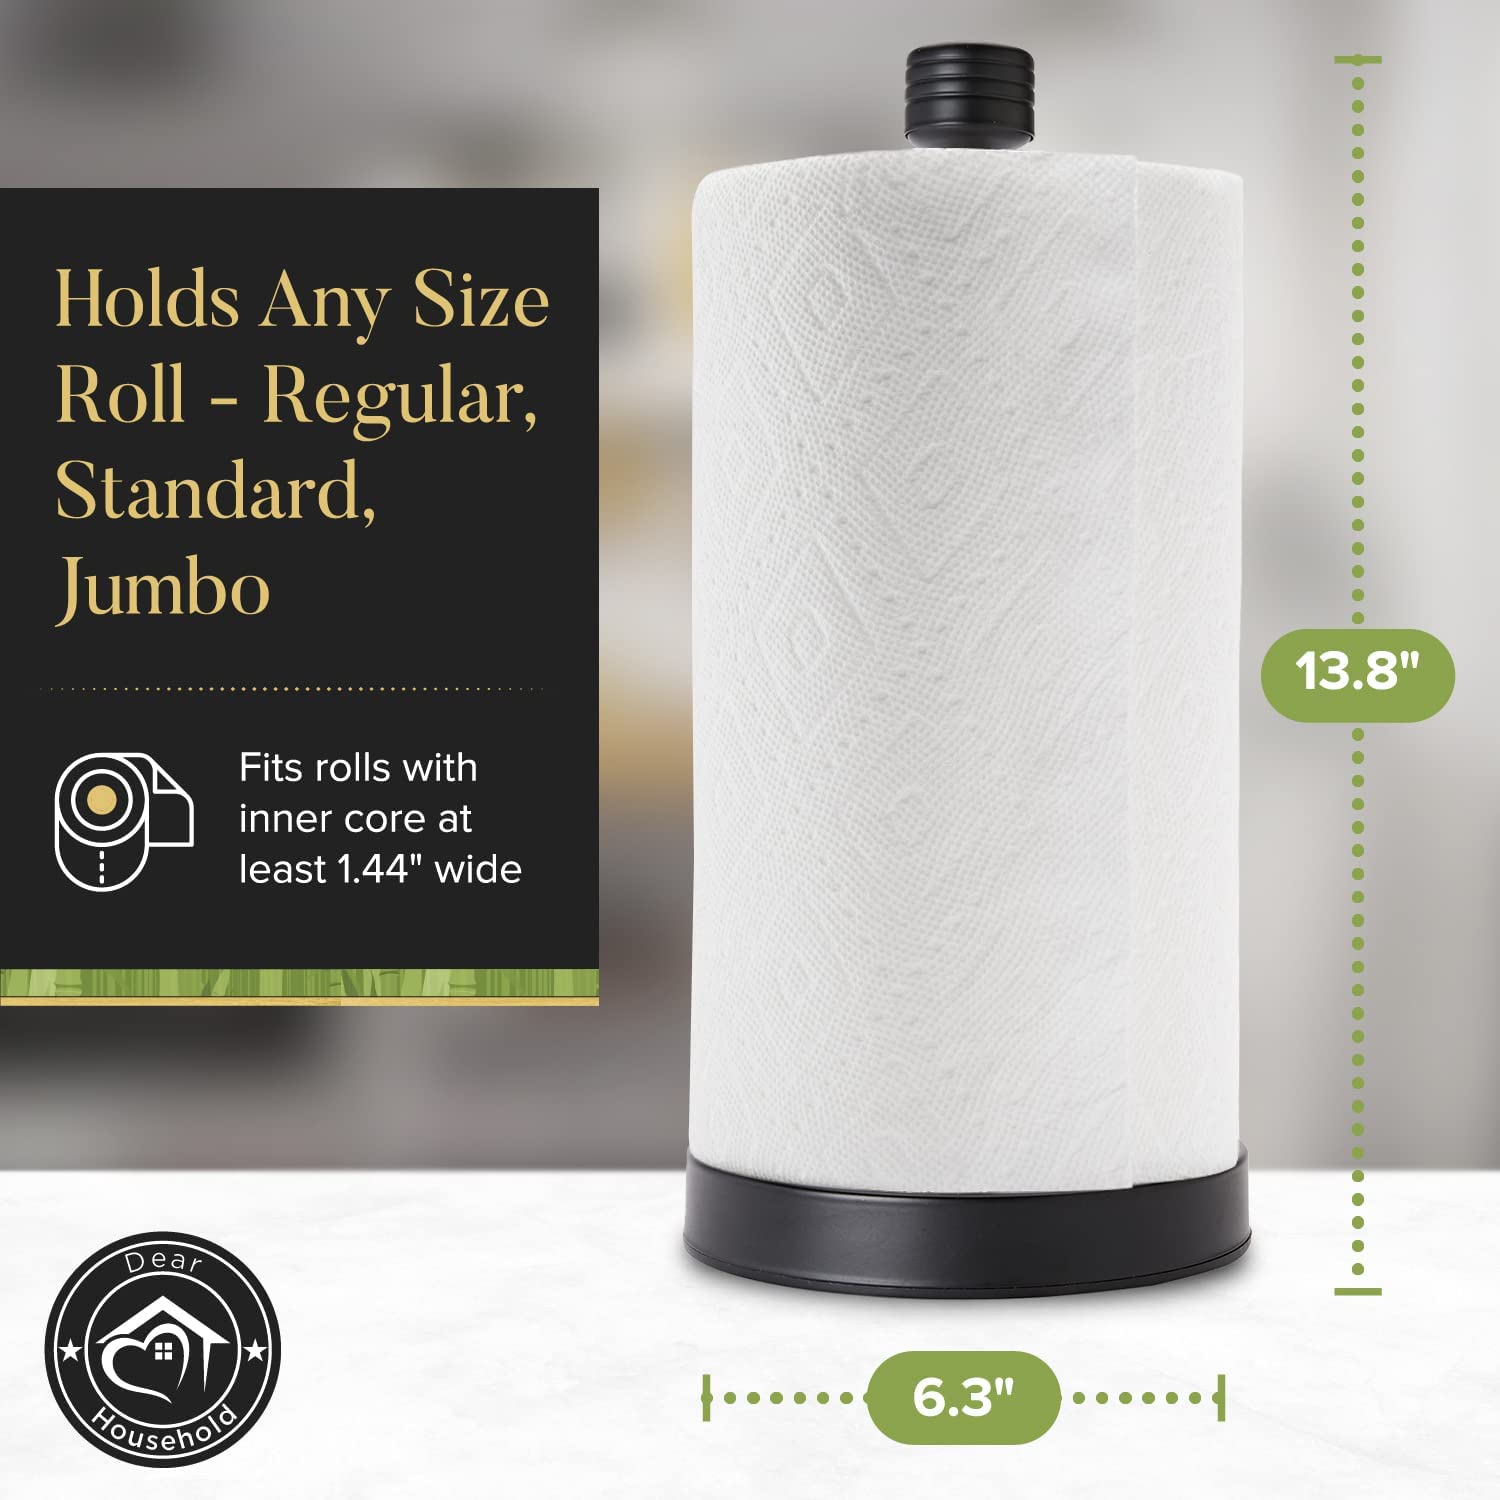 Dear Household Stainless Steel Black Paper Towel Holder Designed for Easy One-Handed Operation - This Sturdy Weighted Paper Towel Dispenser Countertop